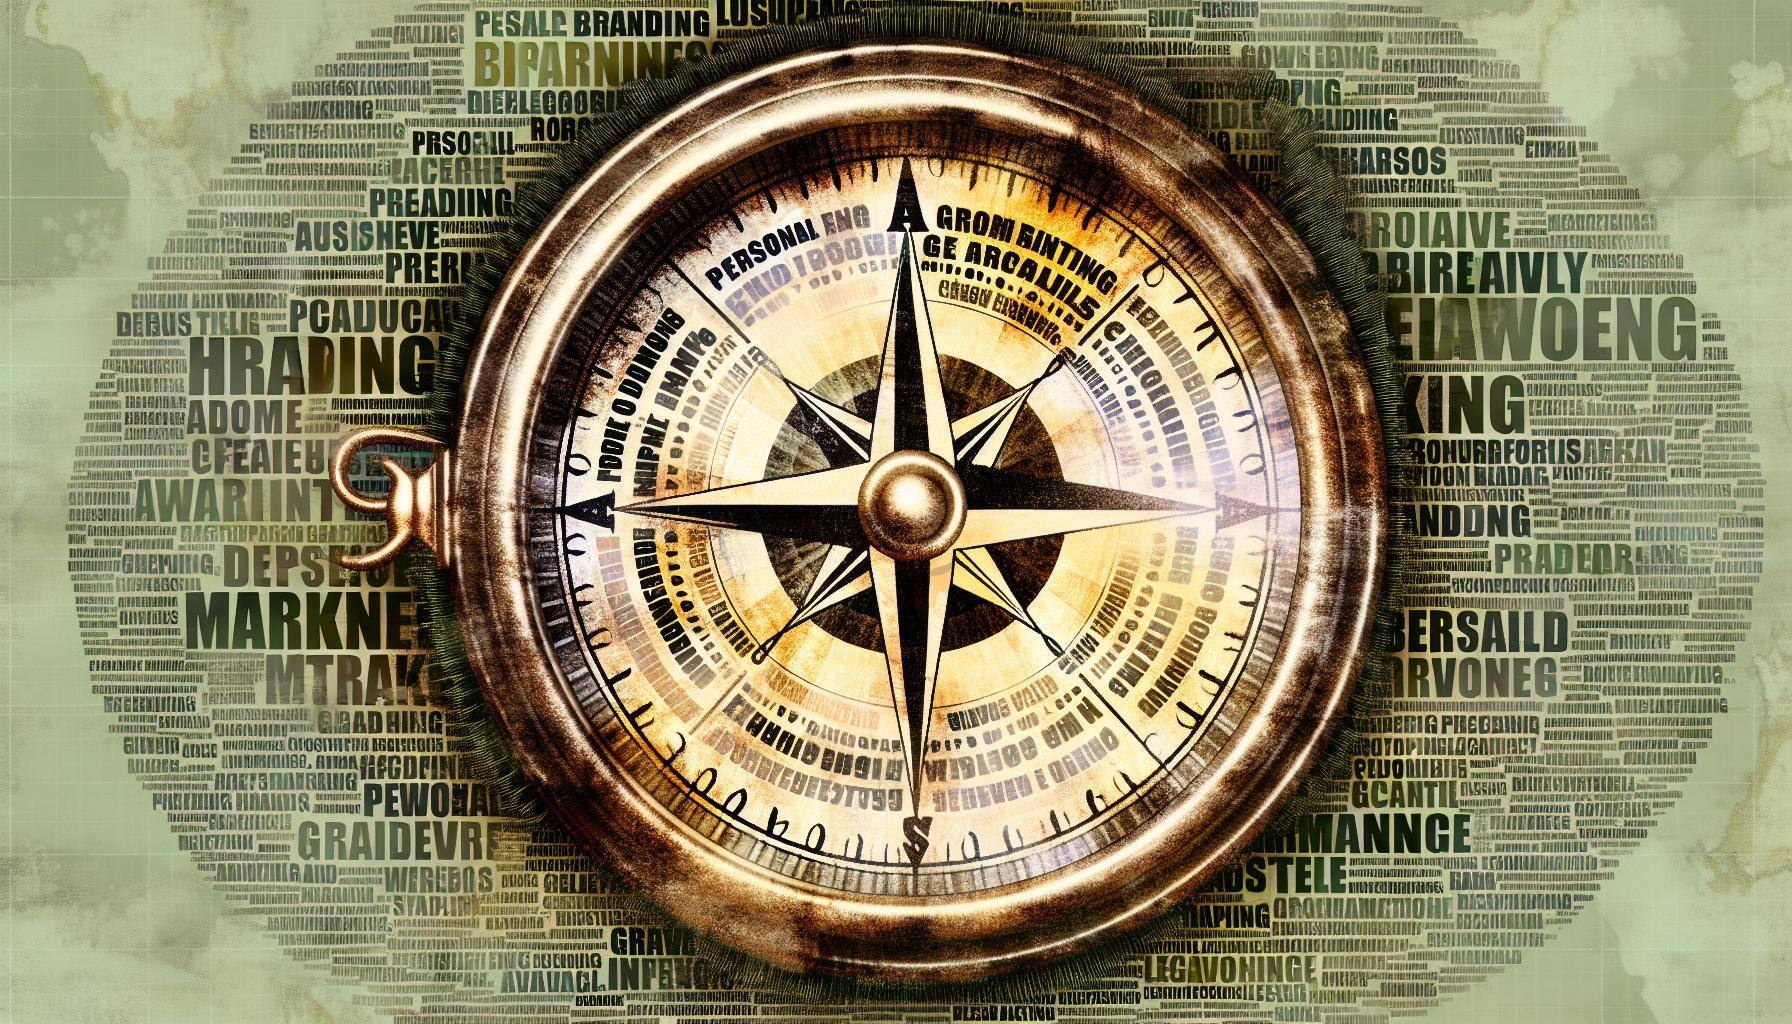 An image of a compass with the words Personal Branding, Growth Hacking on it, surrounded by words related to marketing strategies and techniques